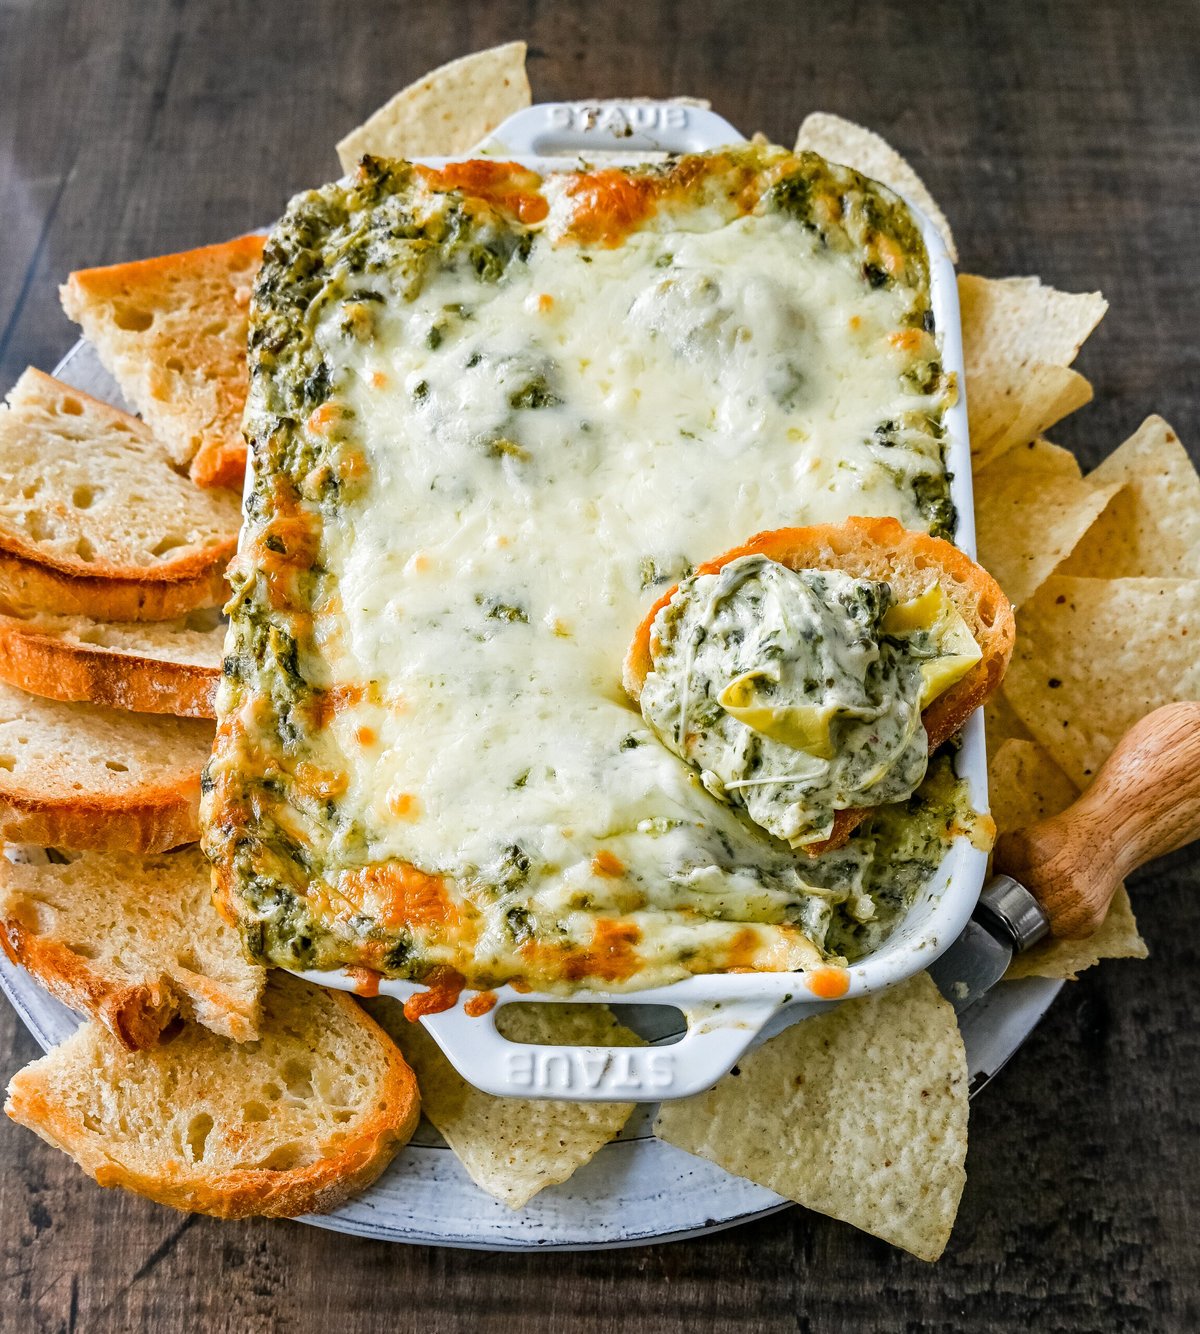 Hot Spinach Artichoke Dip. This easy spinach artichoke dip is creamy and cheesy and always a crowd pleaser! This warm spinach artichoke dip is served with tortilla chips, crackers, or bread for the perfect dip recipe.